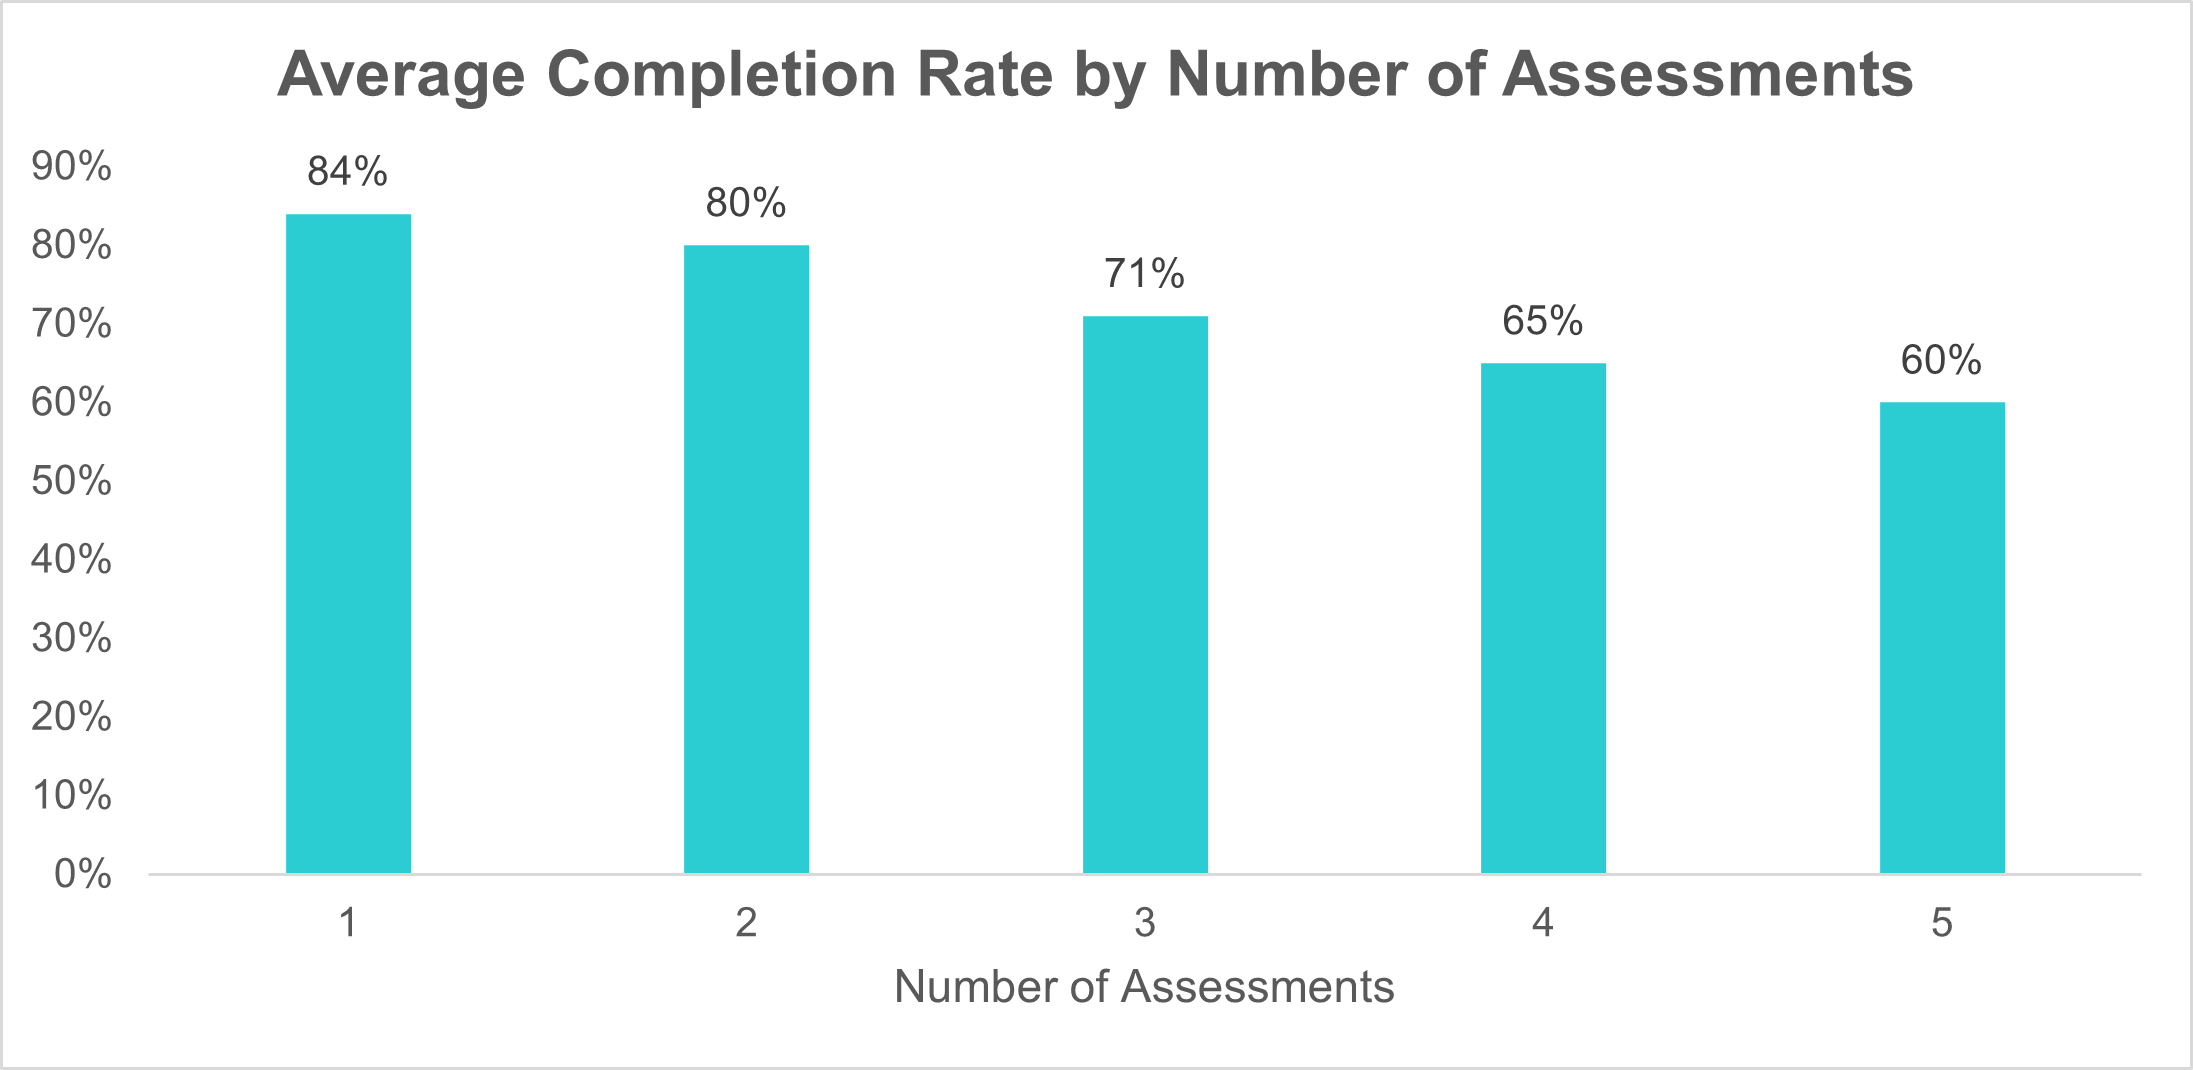 Average Completion Rate by Number of Assessments